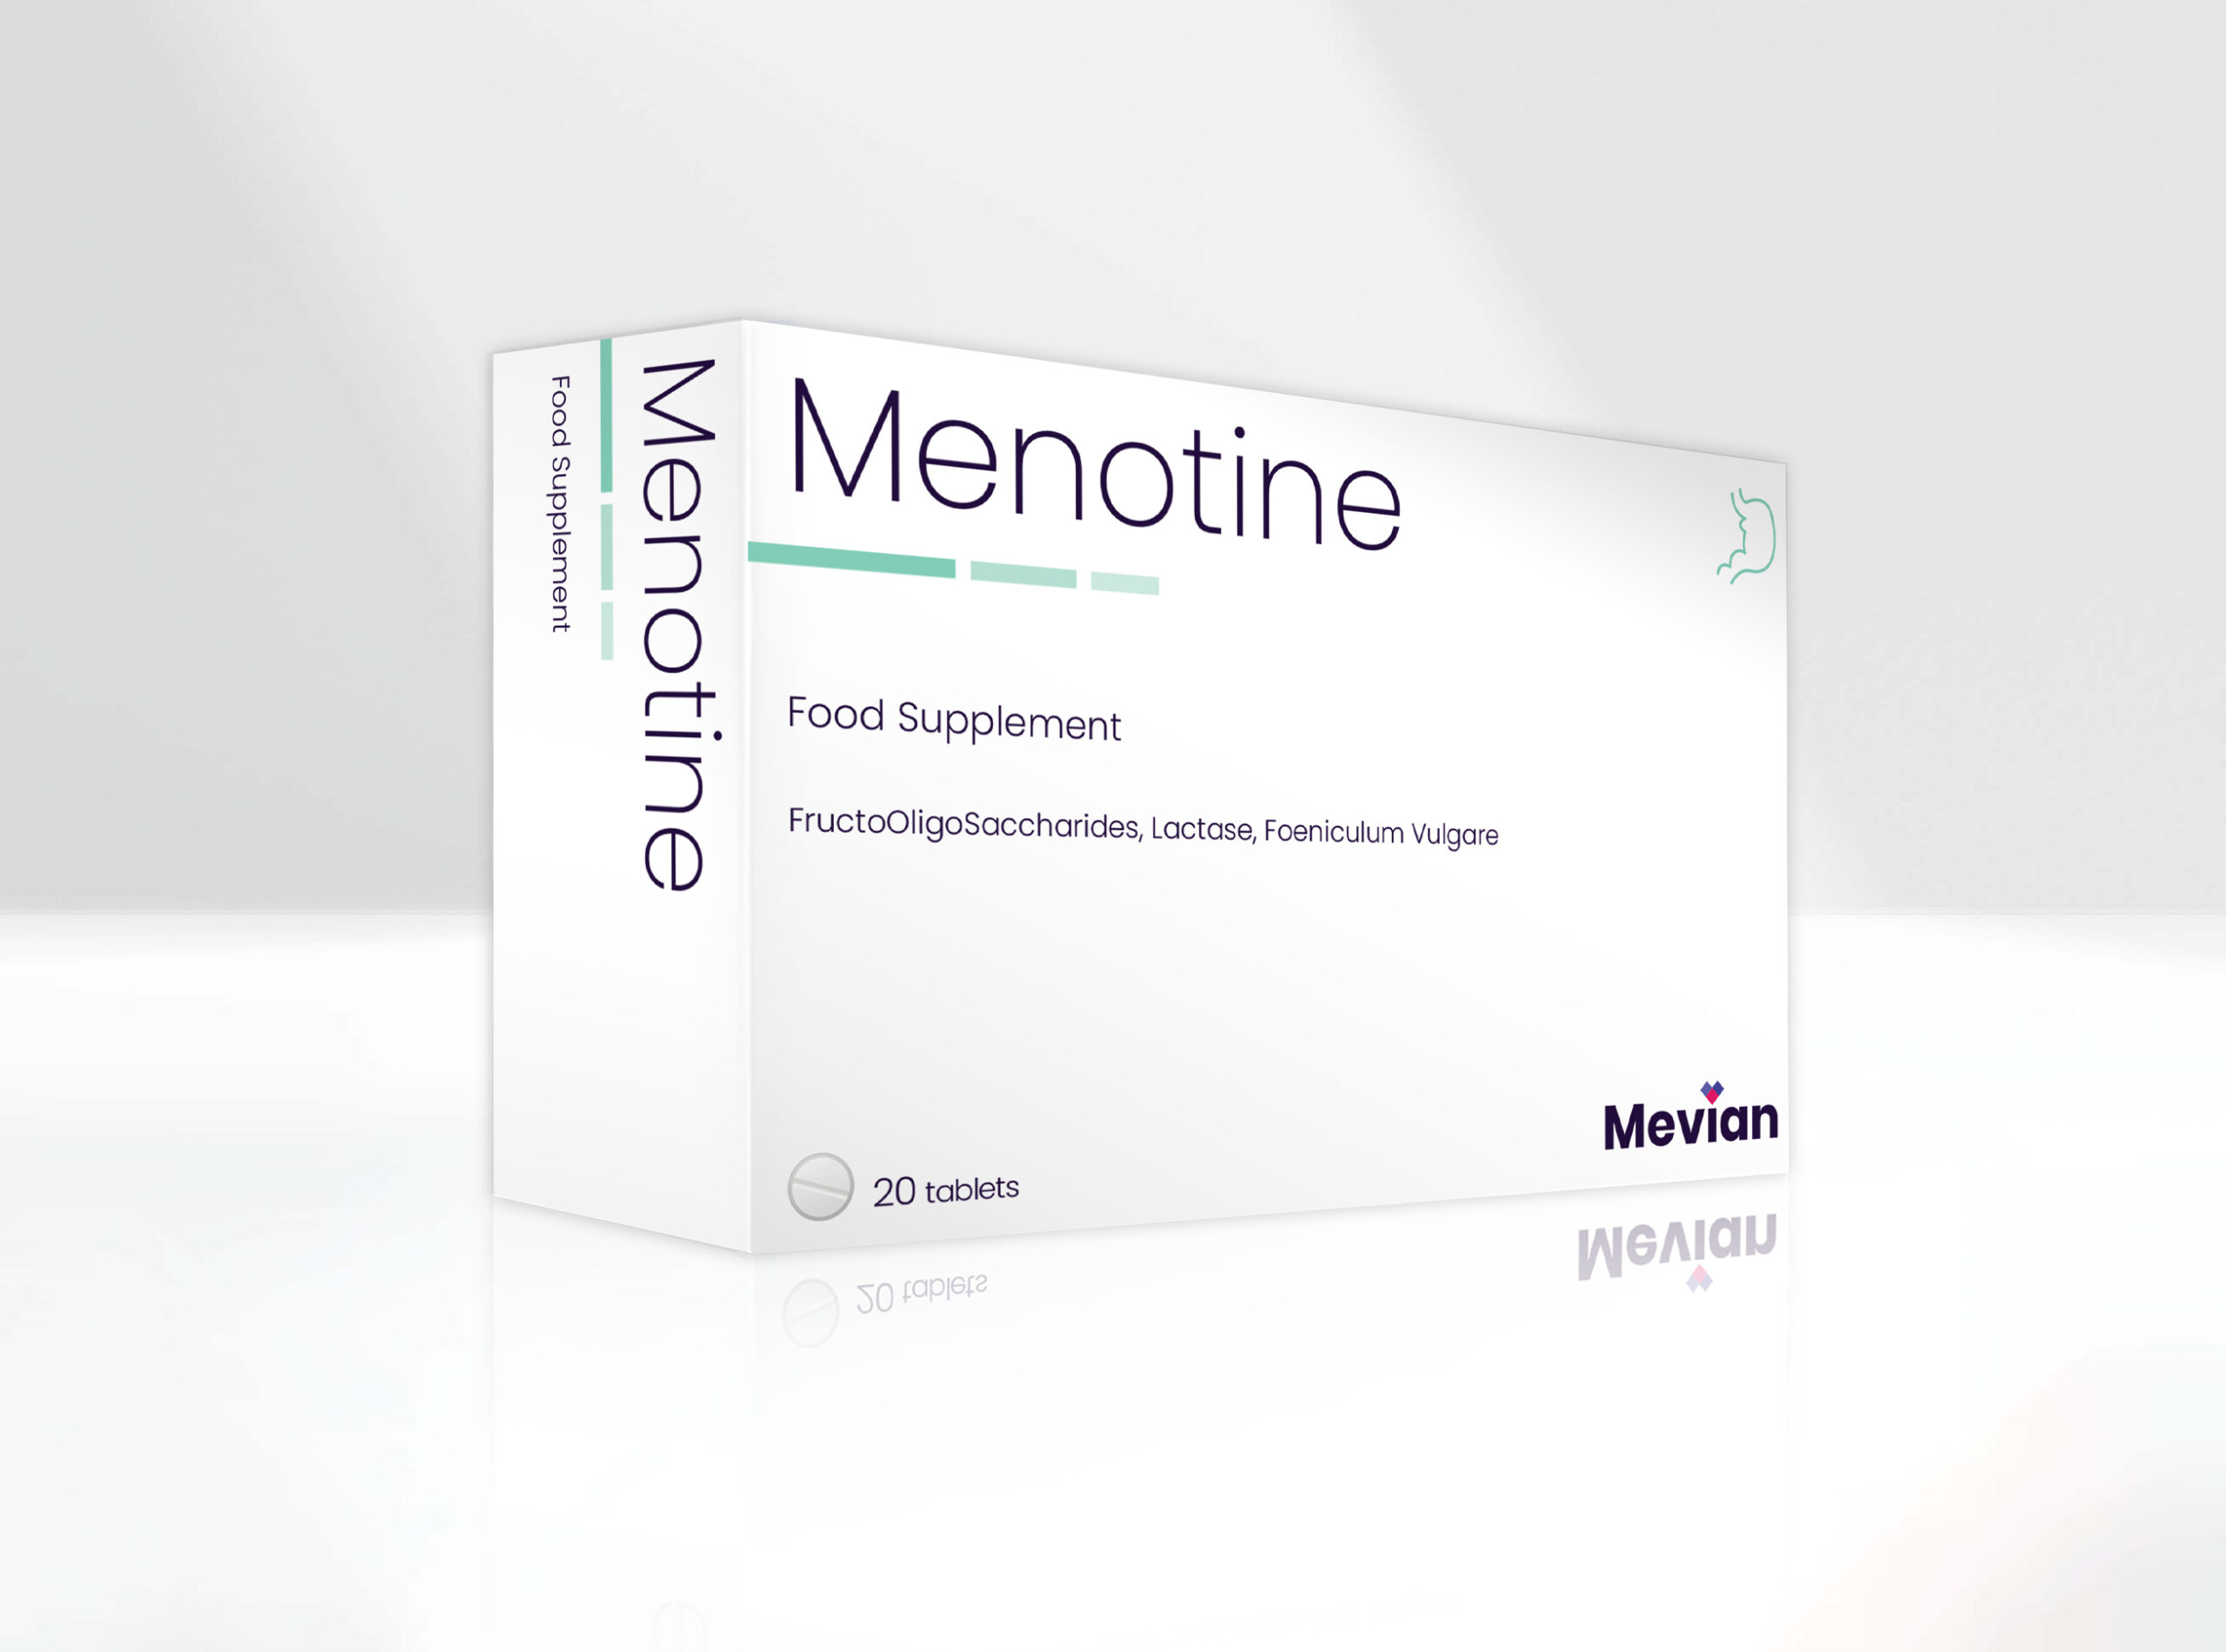 Menotine promotes the balance of intestinal time, favors digestive function, and improves lactose digestion in individuals who maldigest lactose.